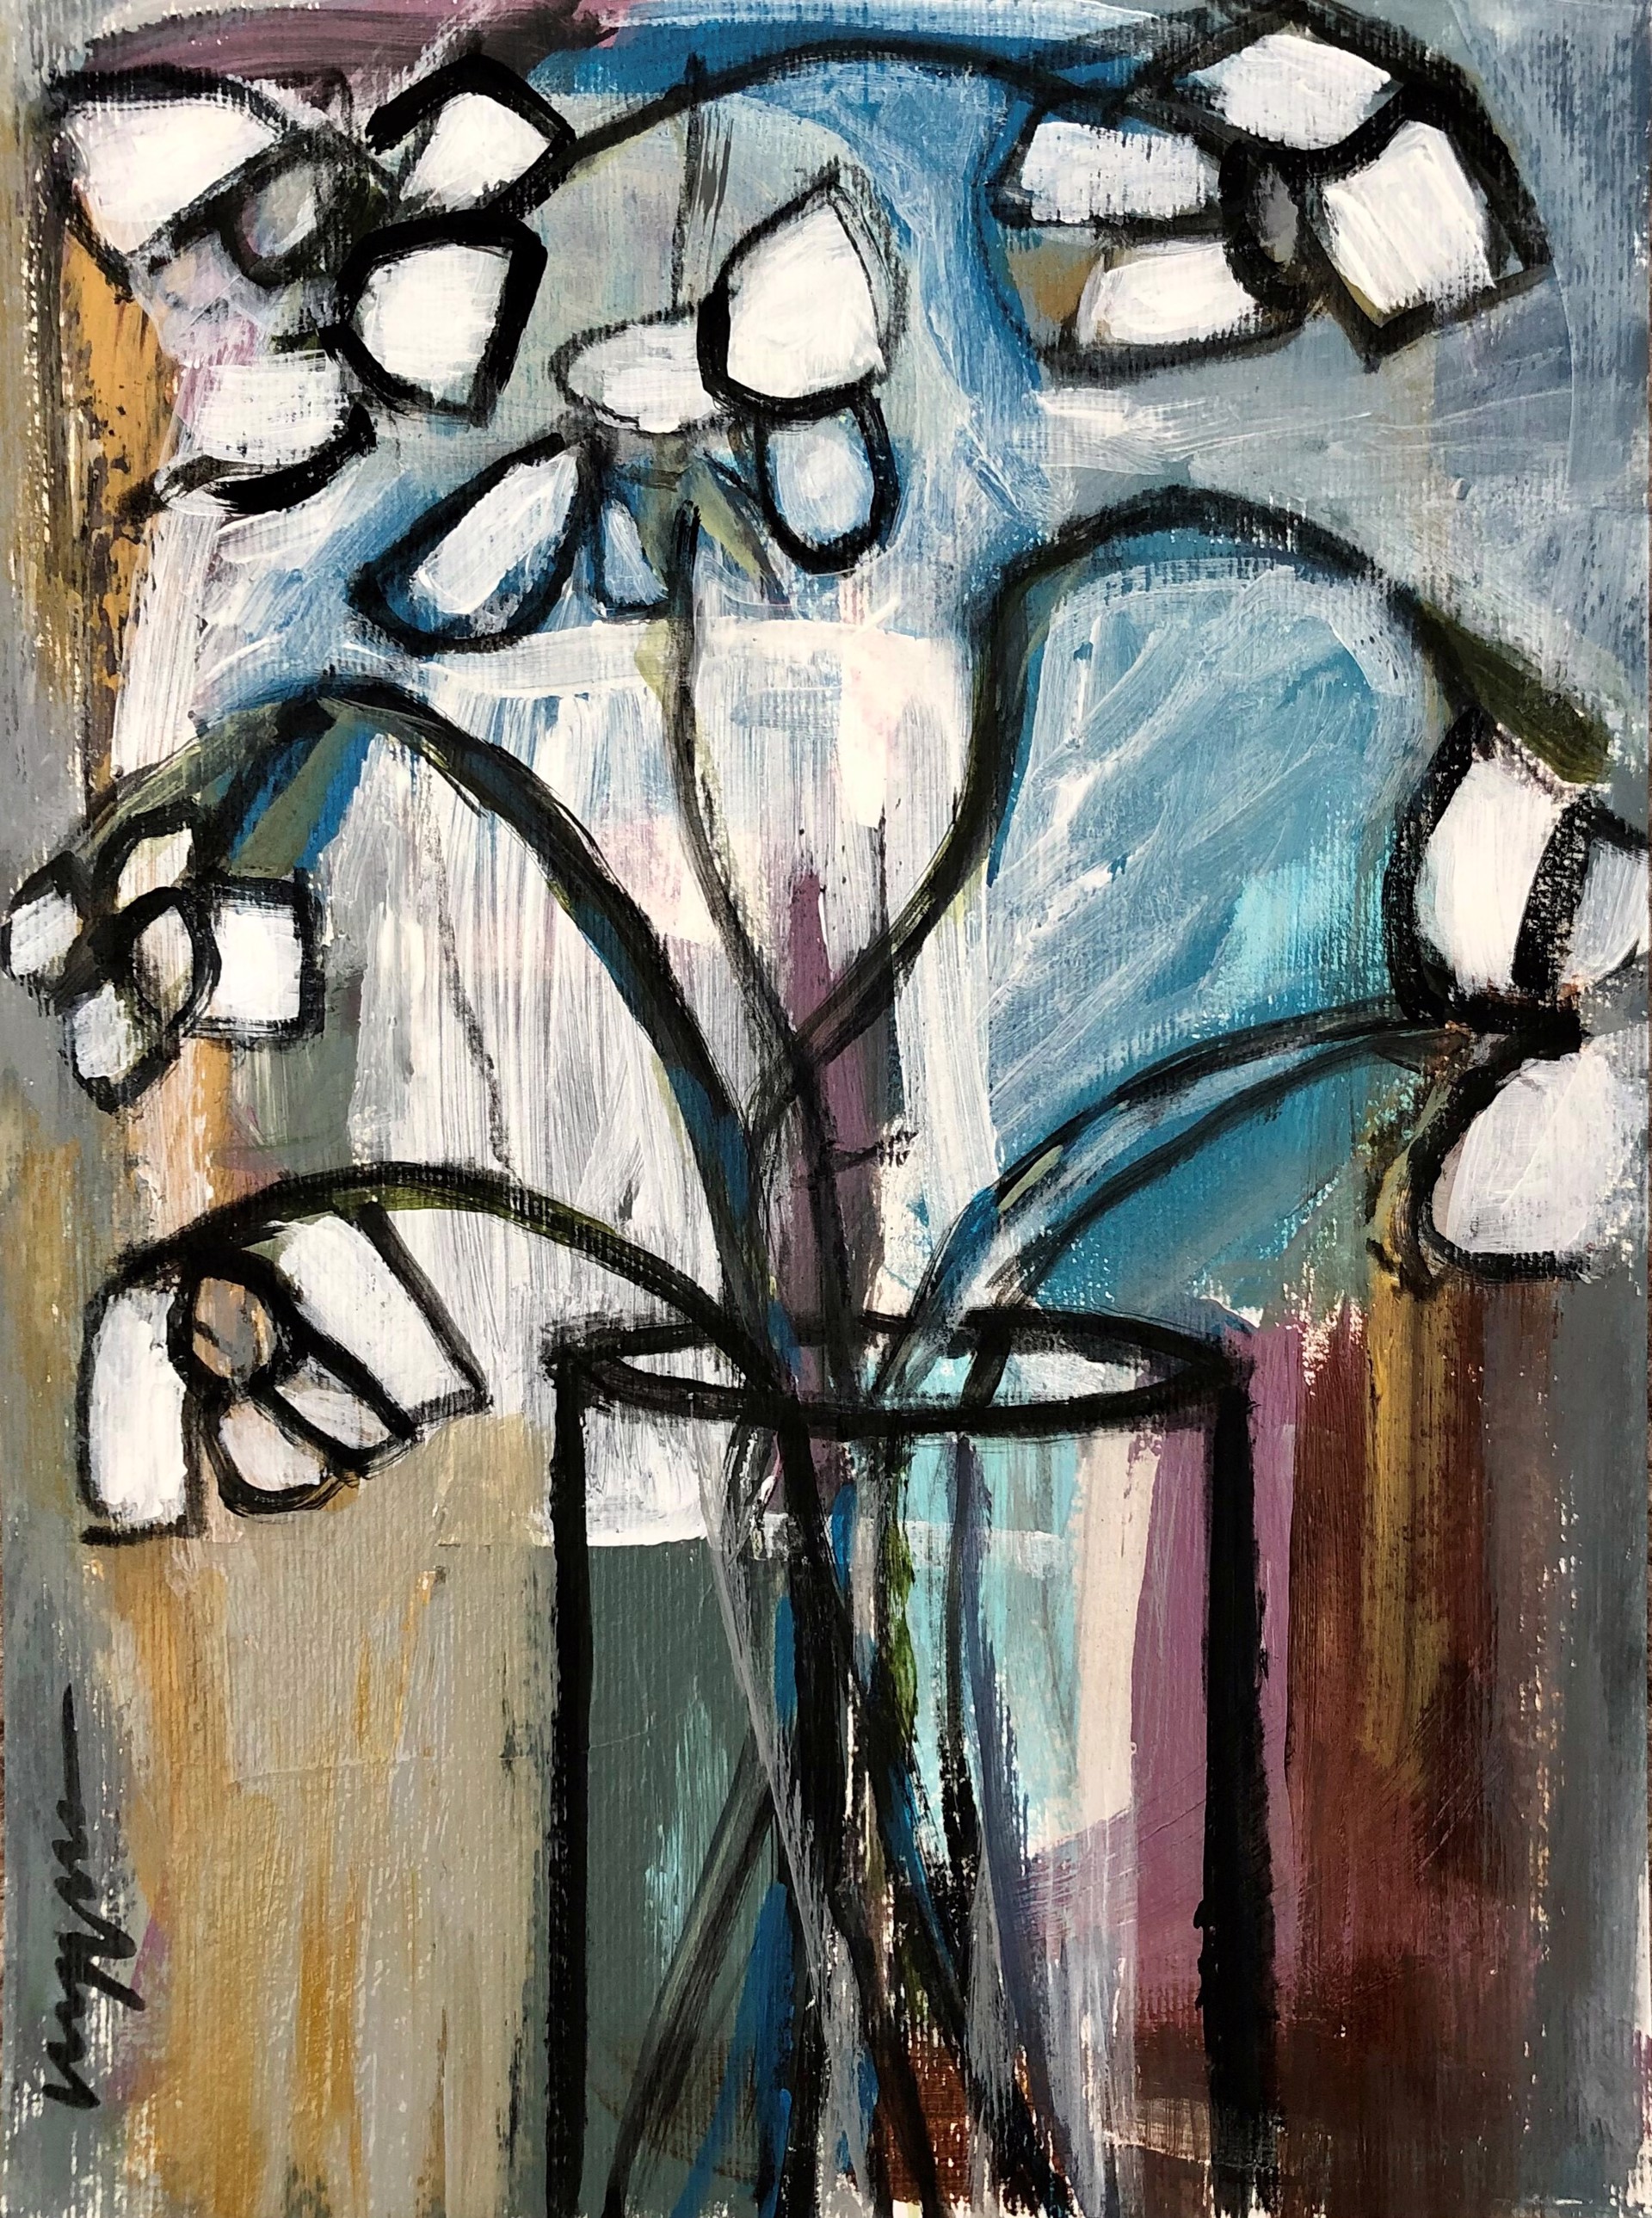 SOLD - Wildflowers in a Vase by Craig Greene